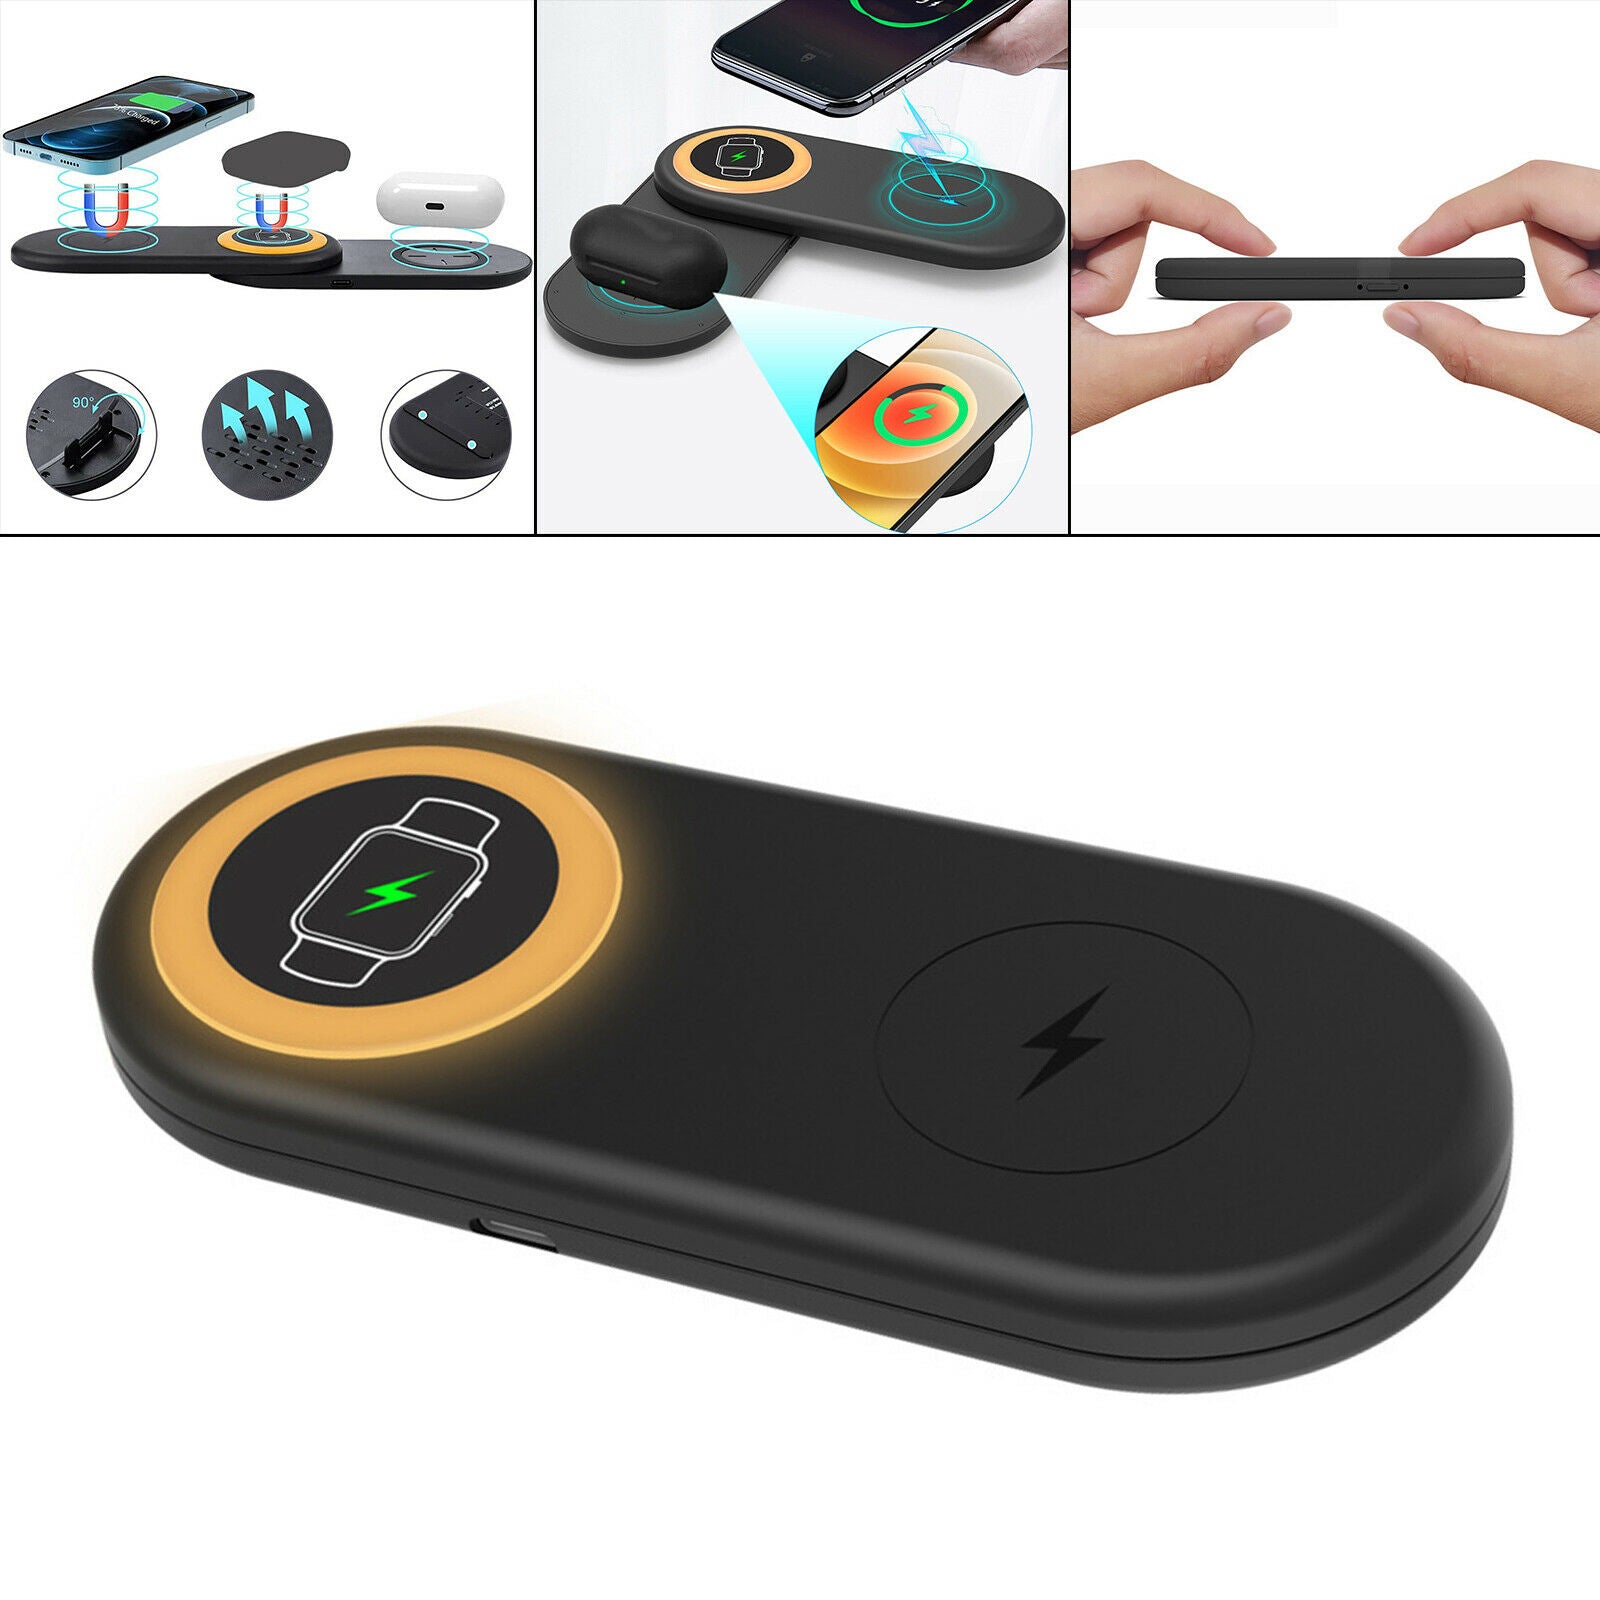 3 in 1 Universal Foldable Wireless Fast Charger Watch Charging Station